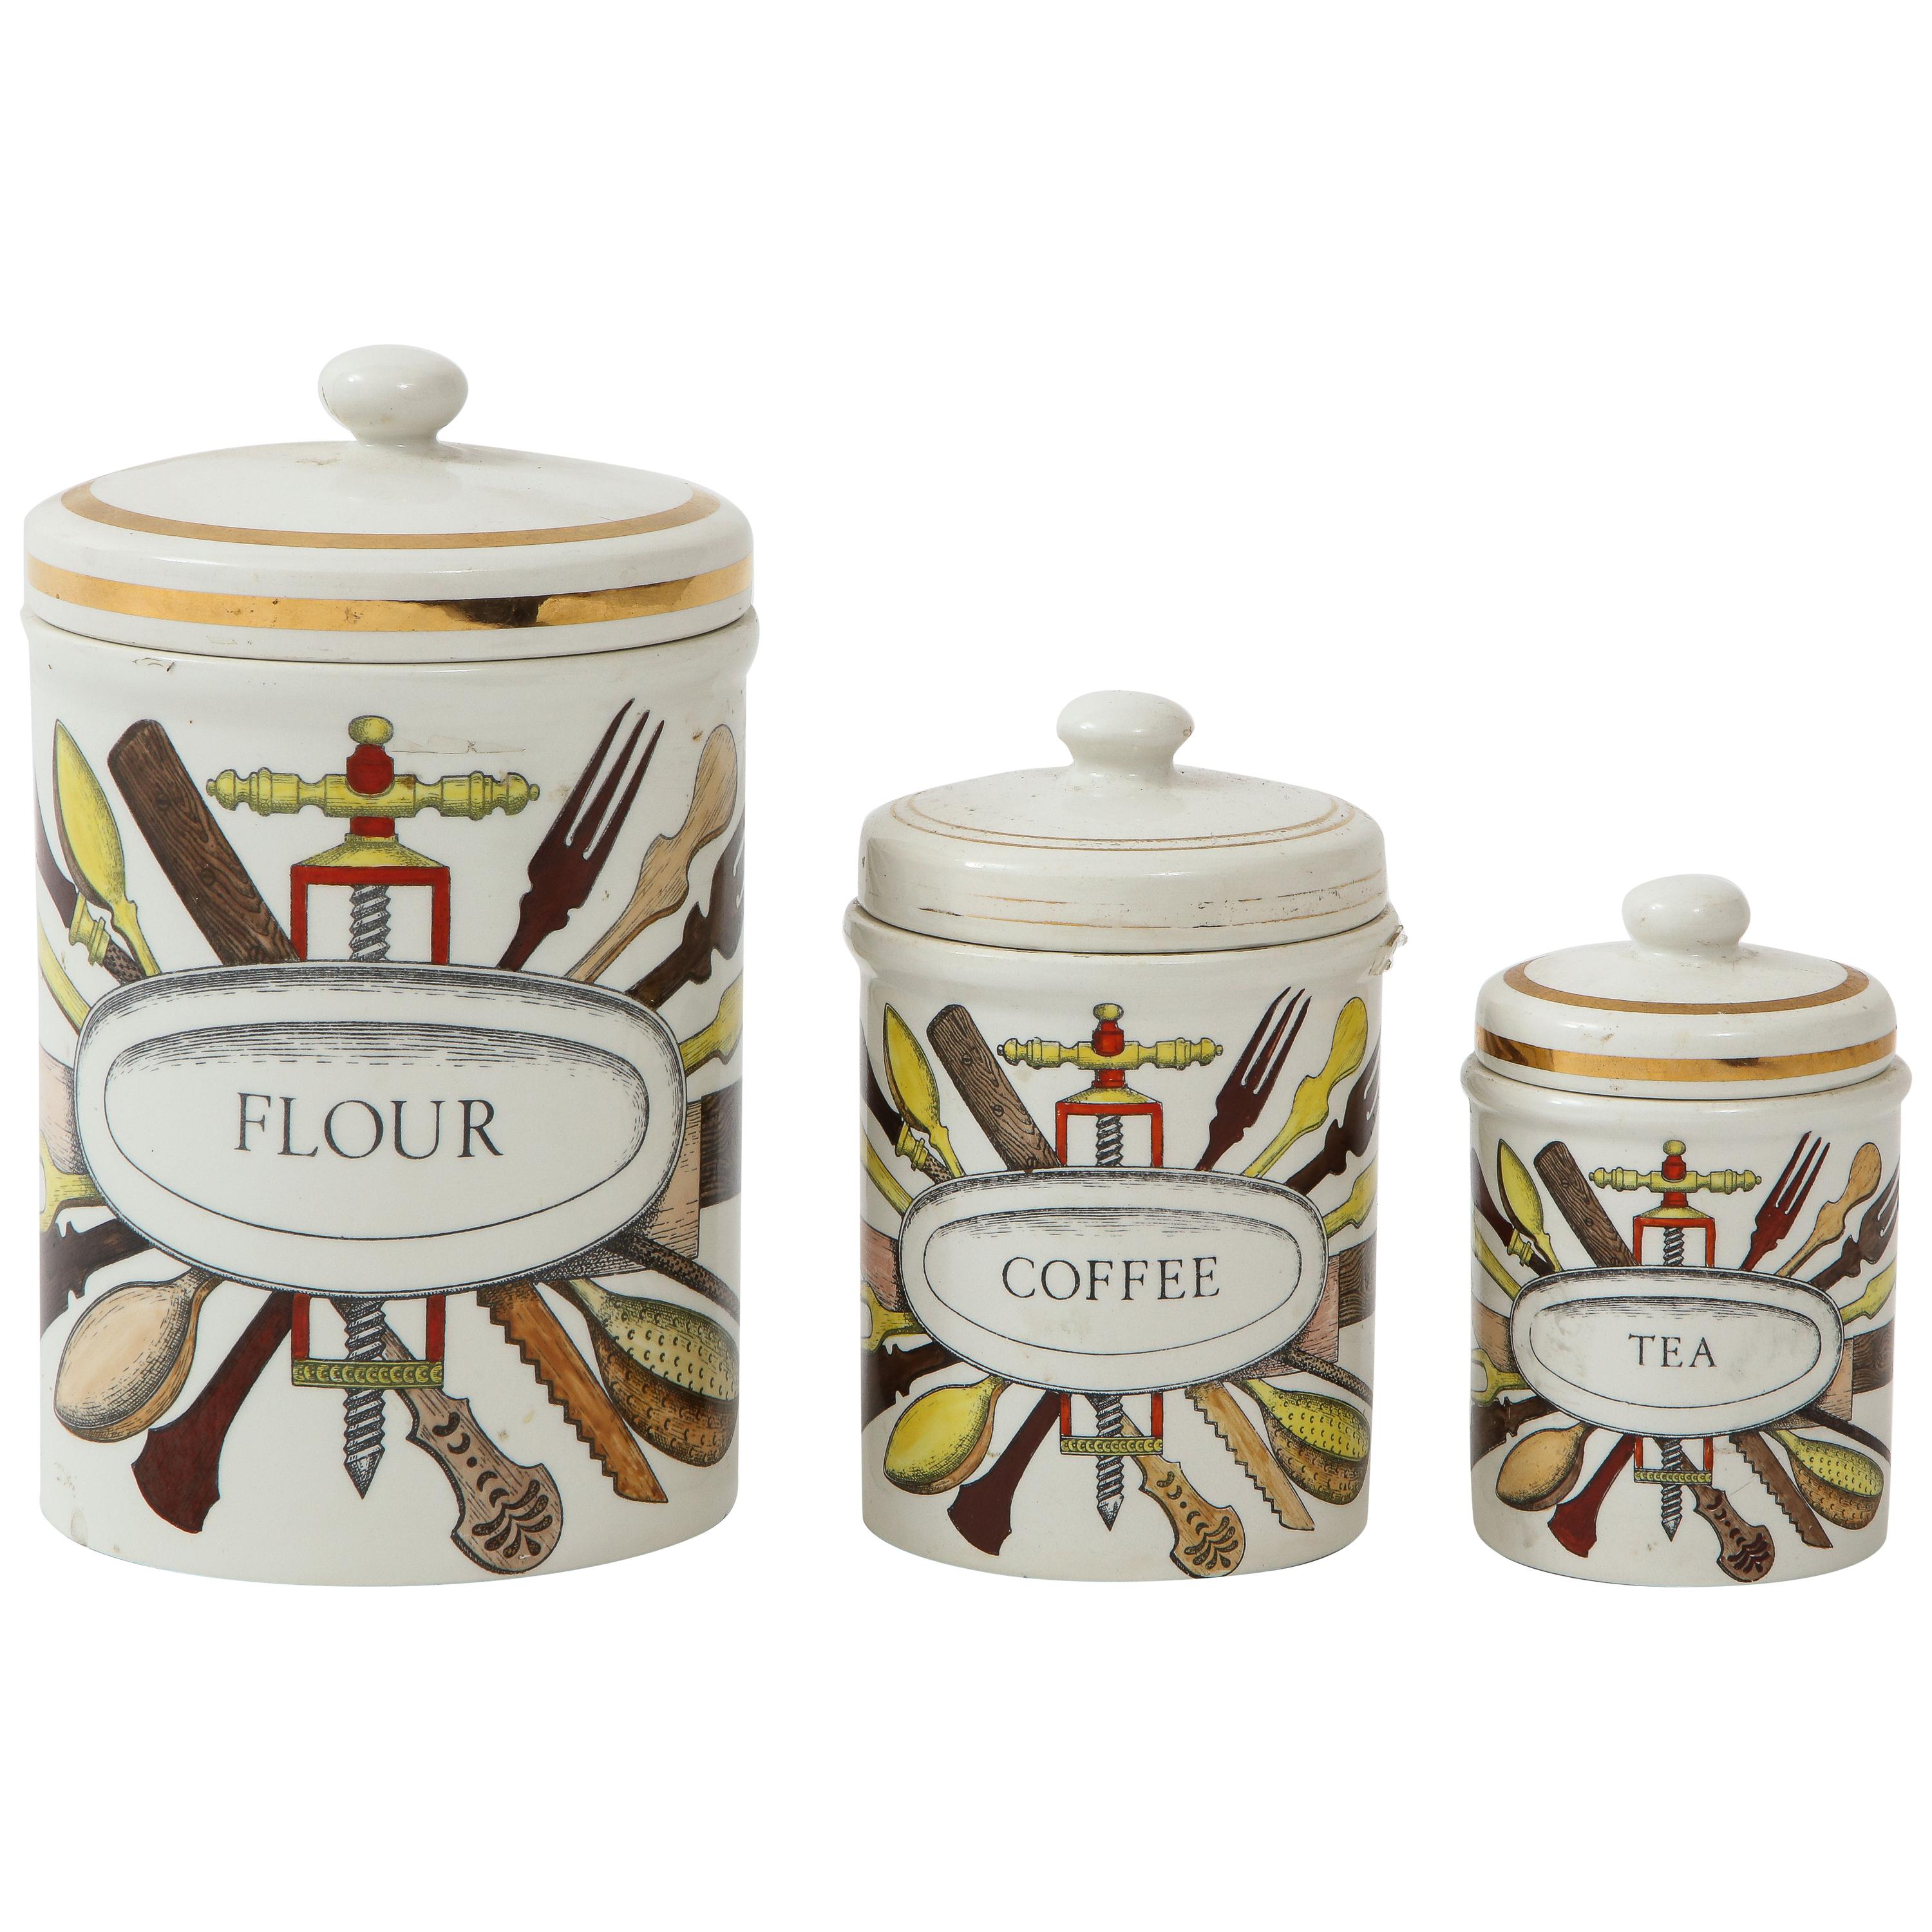 Piero Fornasetti vintage ceramic storage jars, Italy, 1960s.
Flour, coffee, tea
There is a sugar one as well from the same collection but the top is missing. Pictures upon request.
Rare set. Largest one is 12 inches high and 7 inches in diameter.